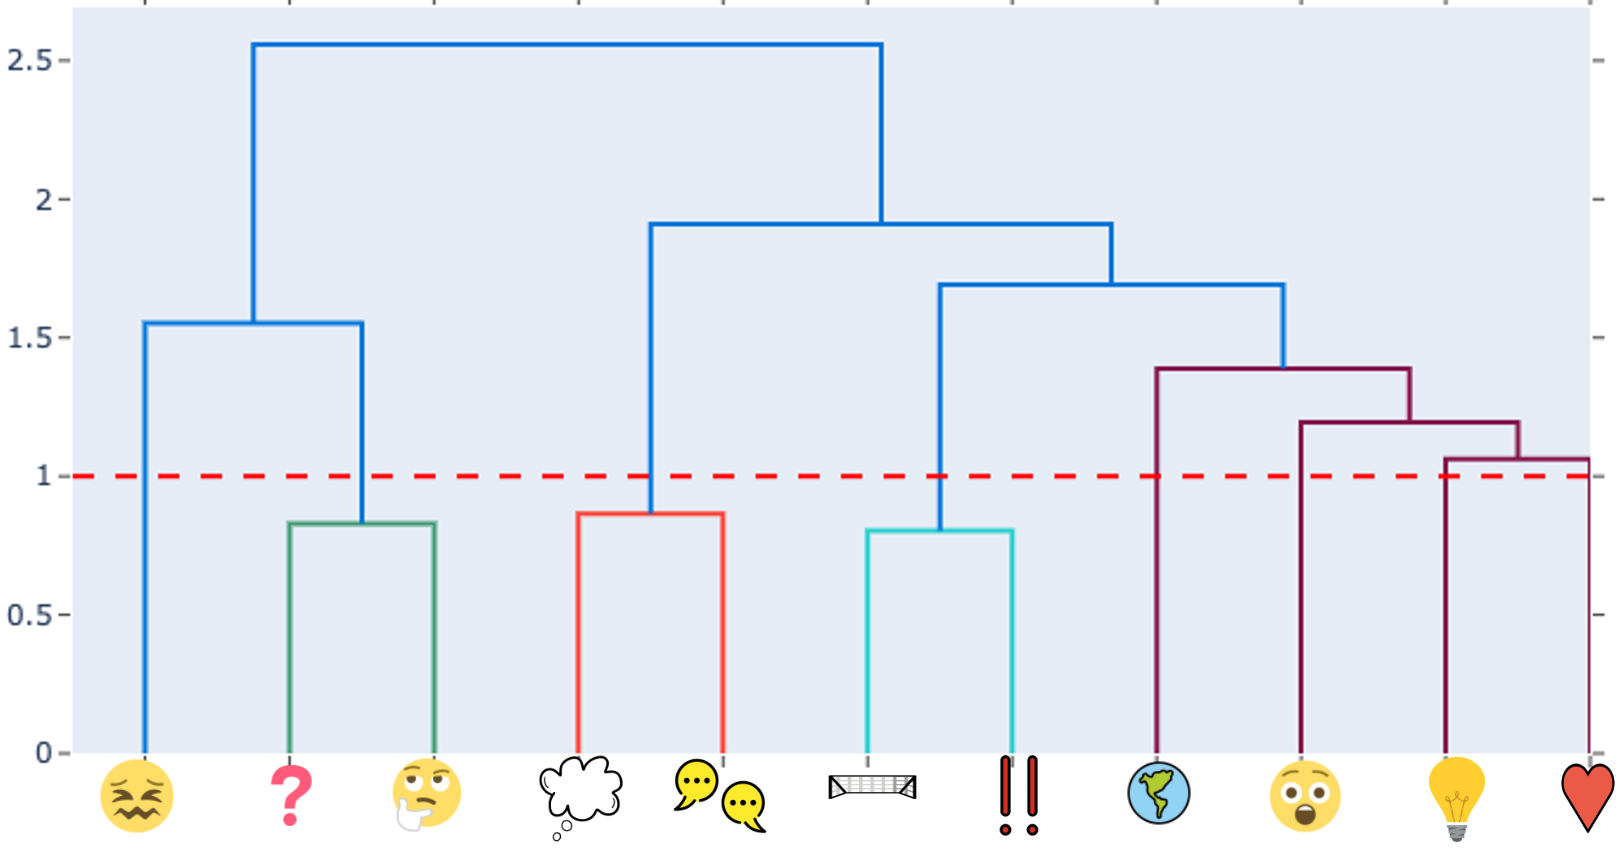 Hierarchical clustering of the emoji based on the prediction of the BERT model